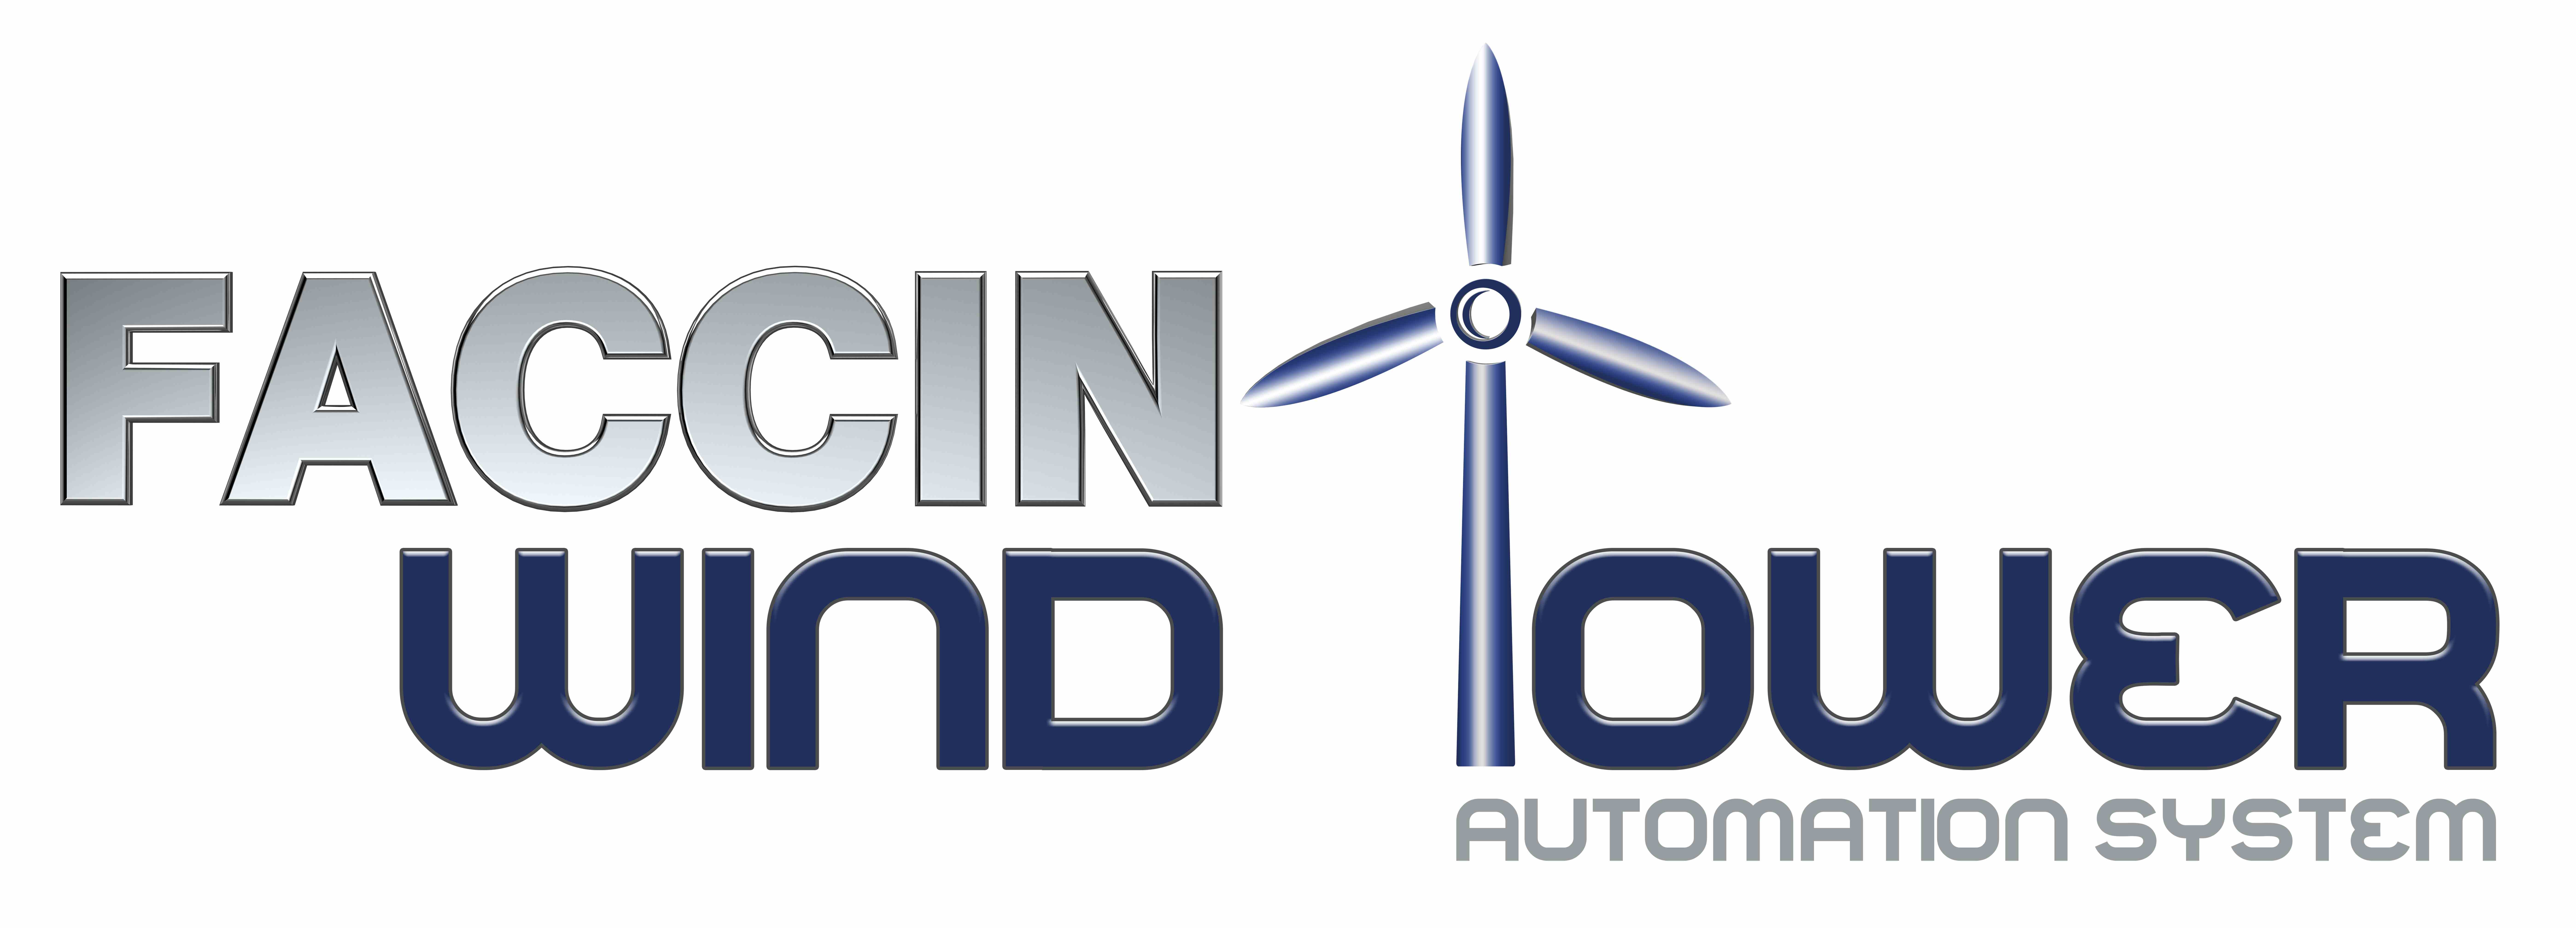 Faccin Wind Tower Automation System